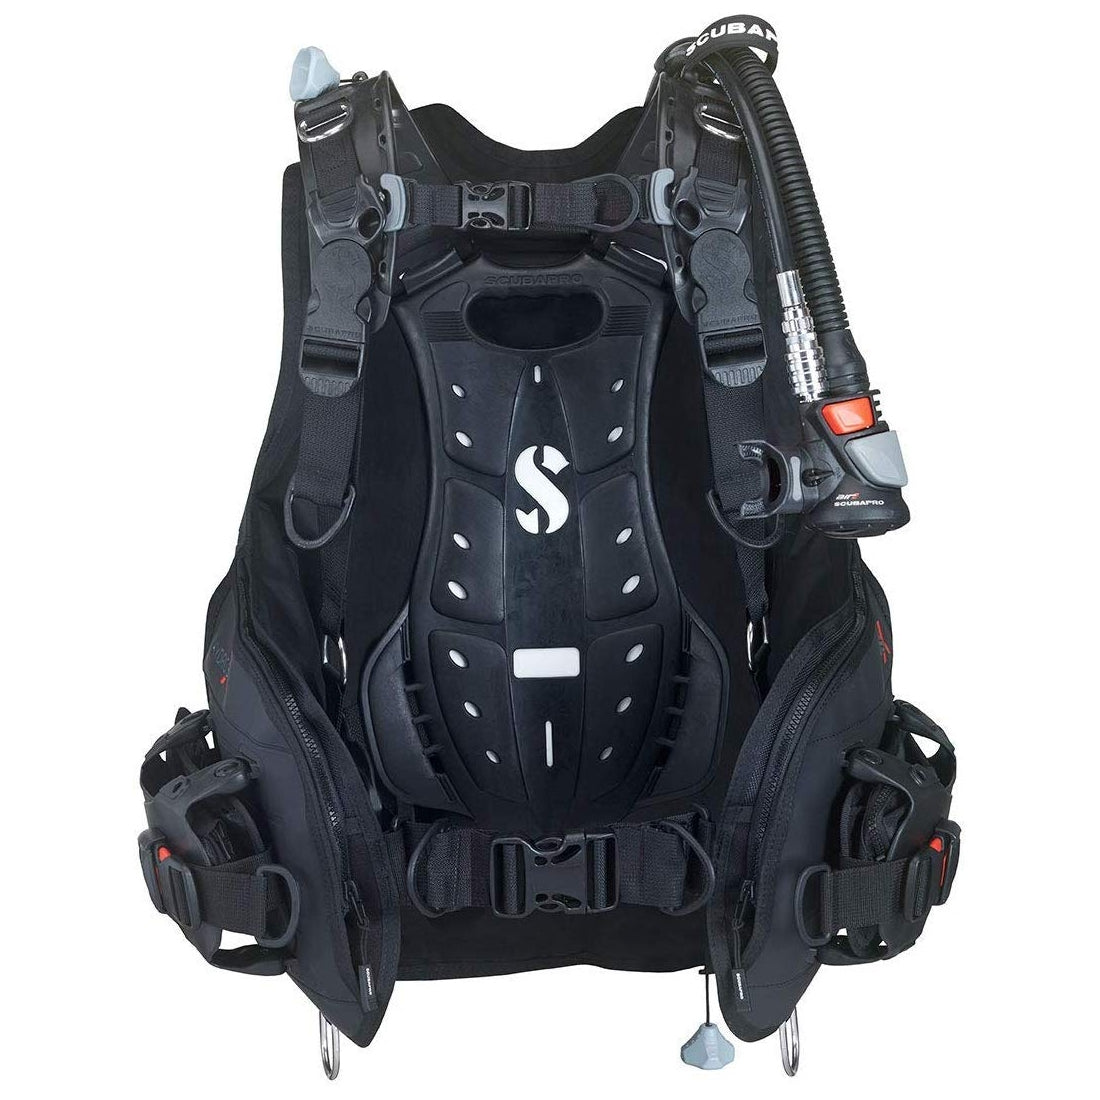 Scubapro Hydros X Men's BC/BCD with AIR2 Inflator for Scuba Diving